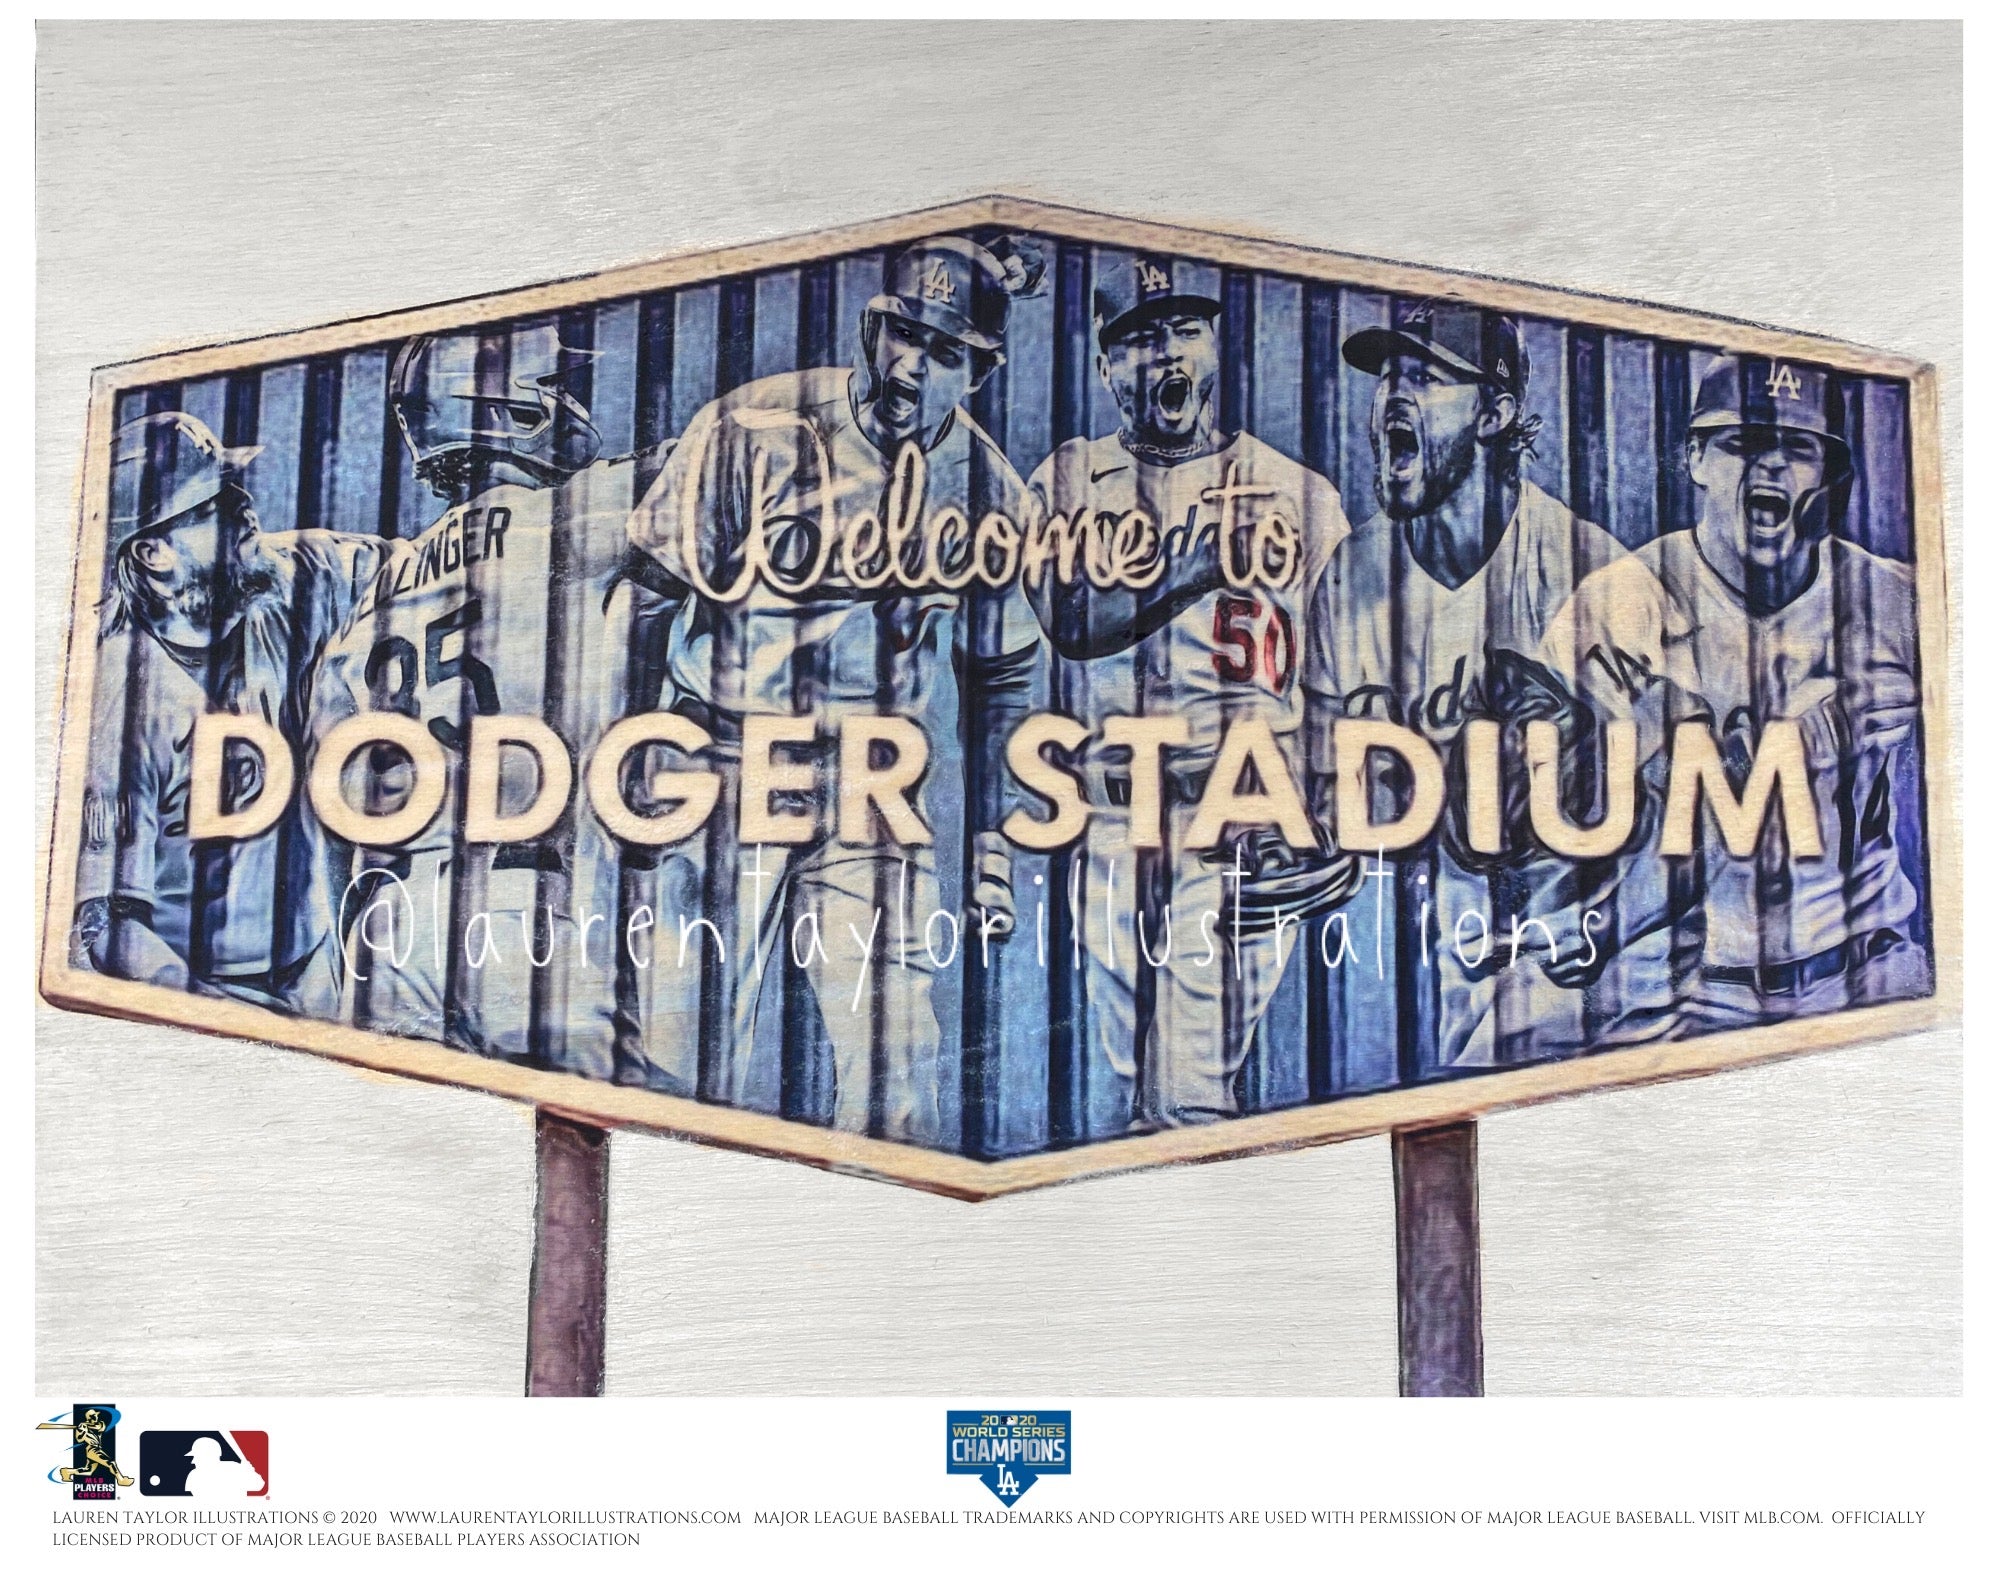 "Dodger Blue" (Los Angeles Dodgers) 2020 World Series Champions - Officially Licensed MLB Print - Special Commemorative Limited Release